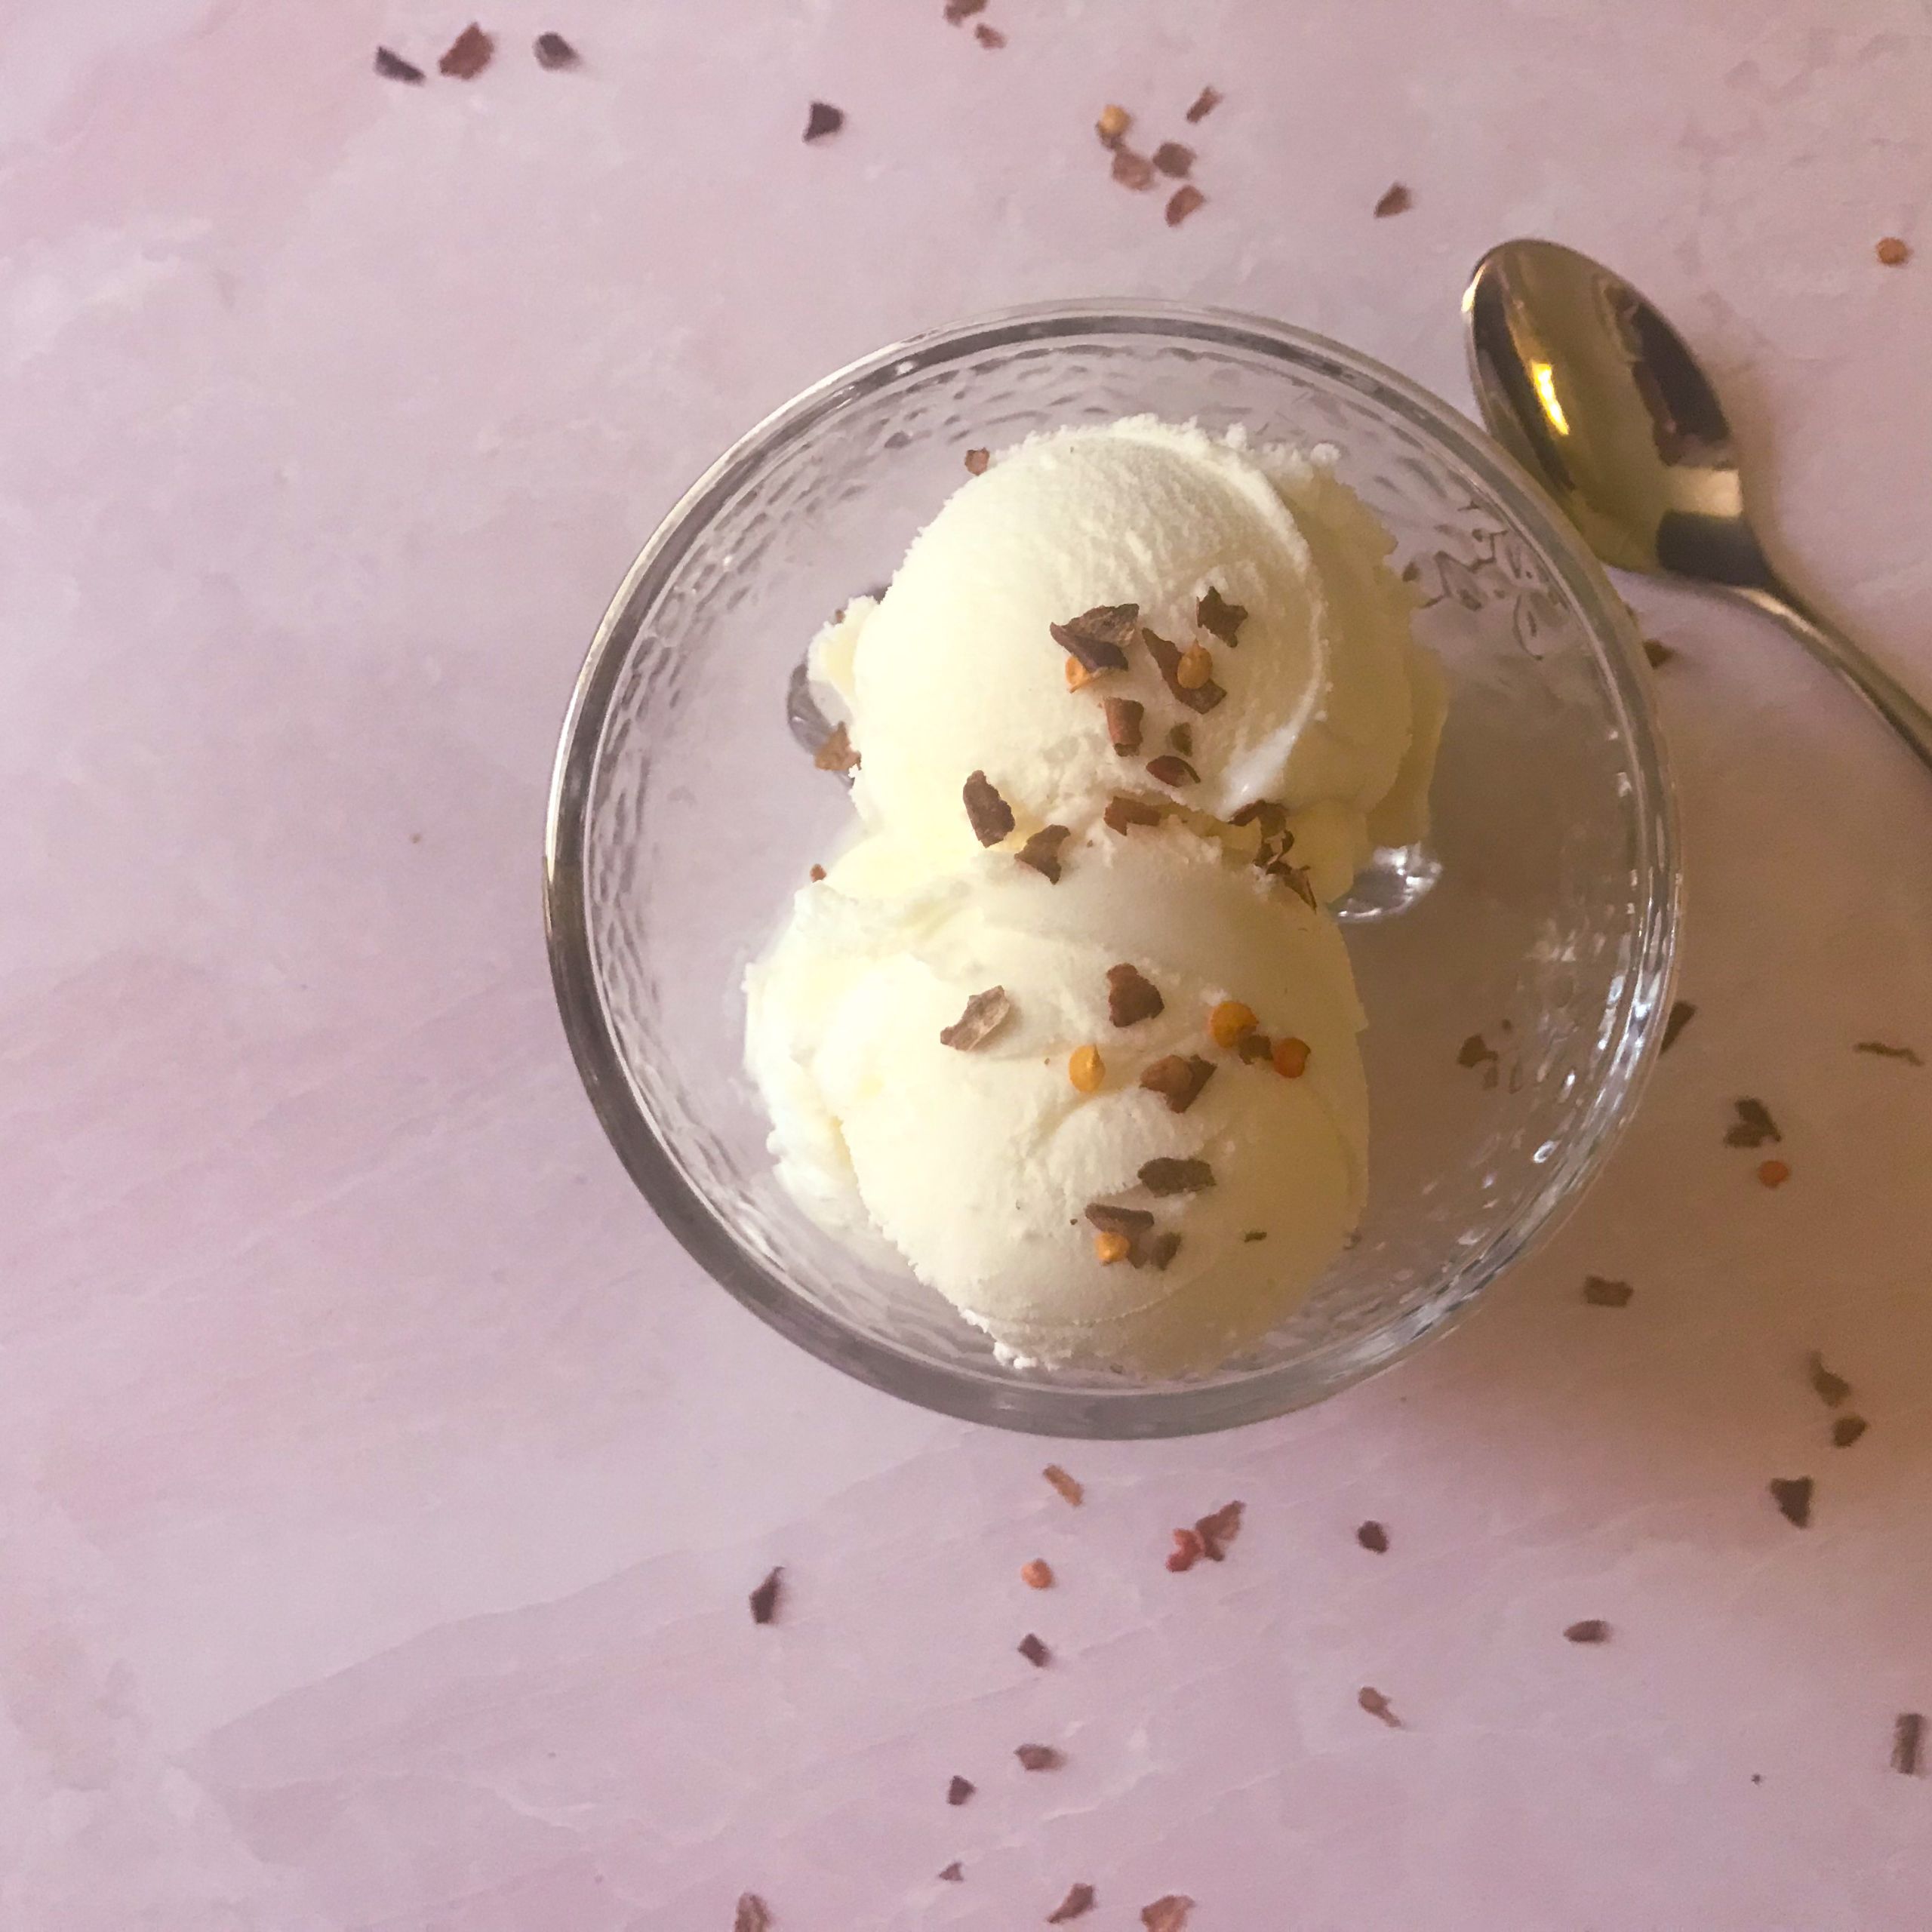 a bowl of ice cream with chili flakes on top